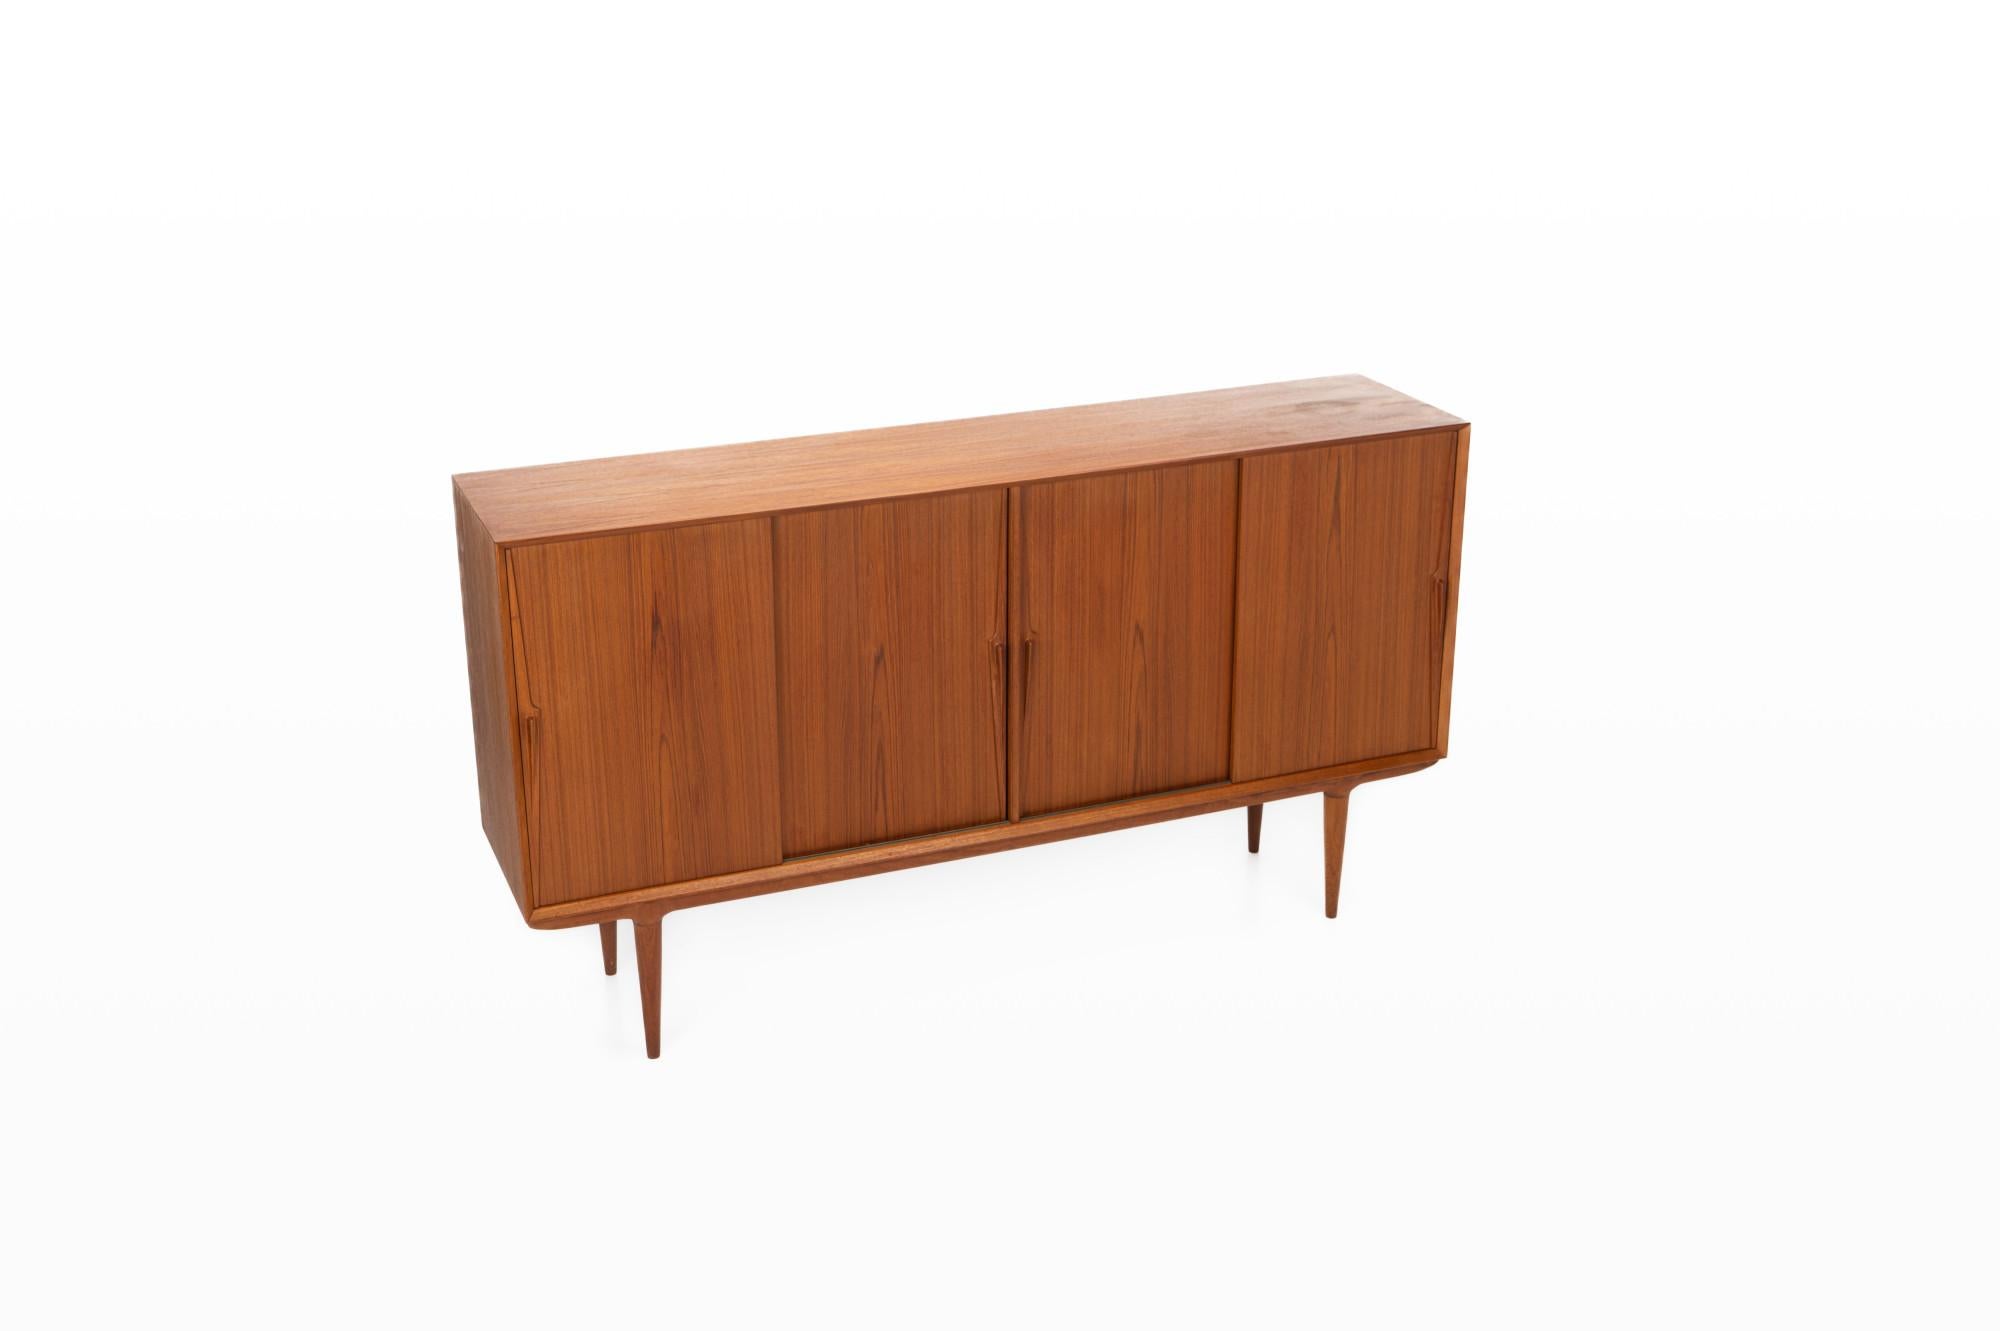 This beautiful teak highboard was designed for Omann Jun Møbelfabrik in Denmark. The sideboard has four sliding doors and a lot of storage space. Designed as Model 19 and marked by the producer.